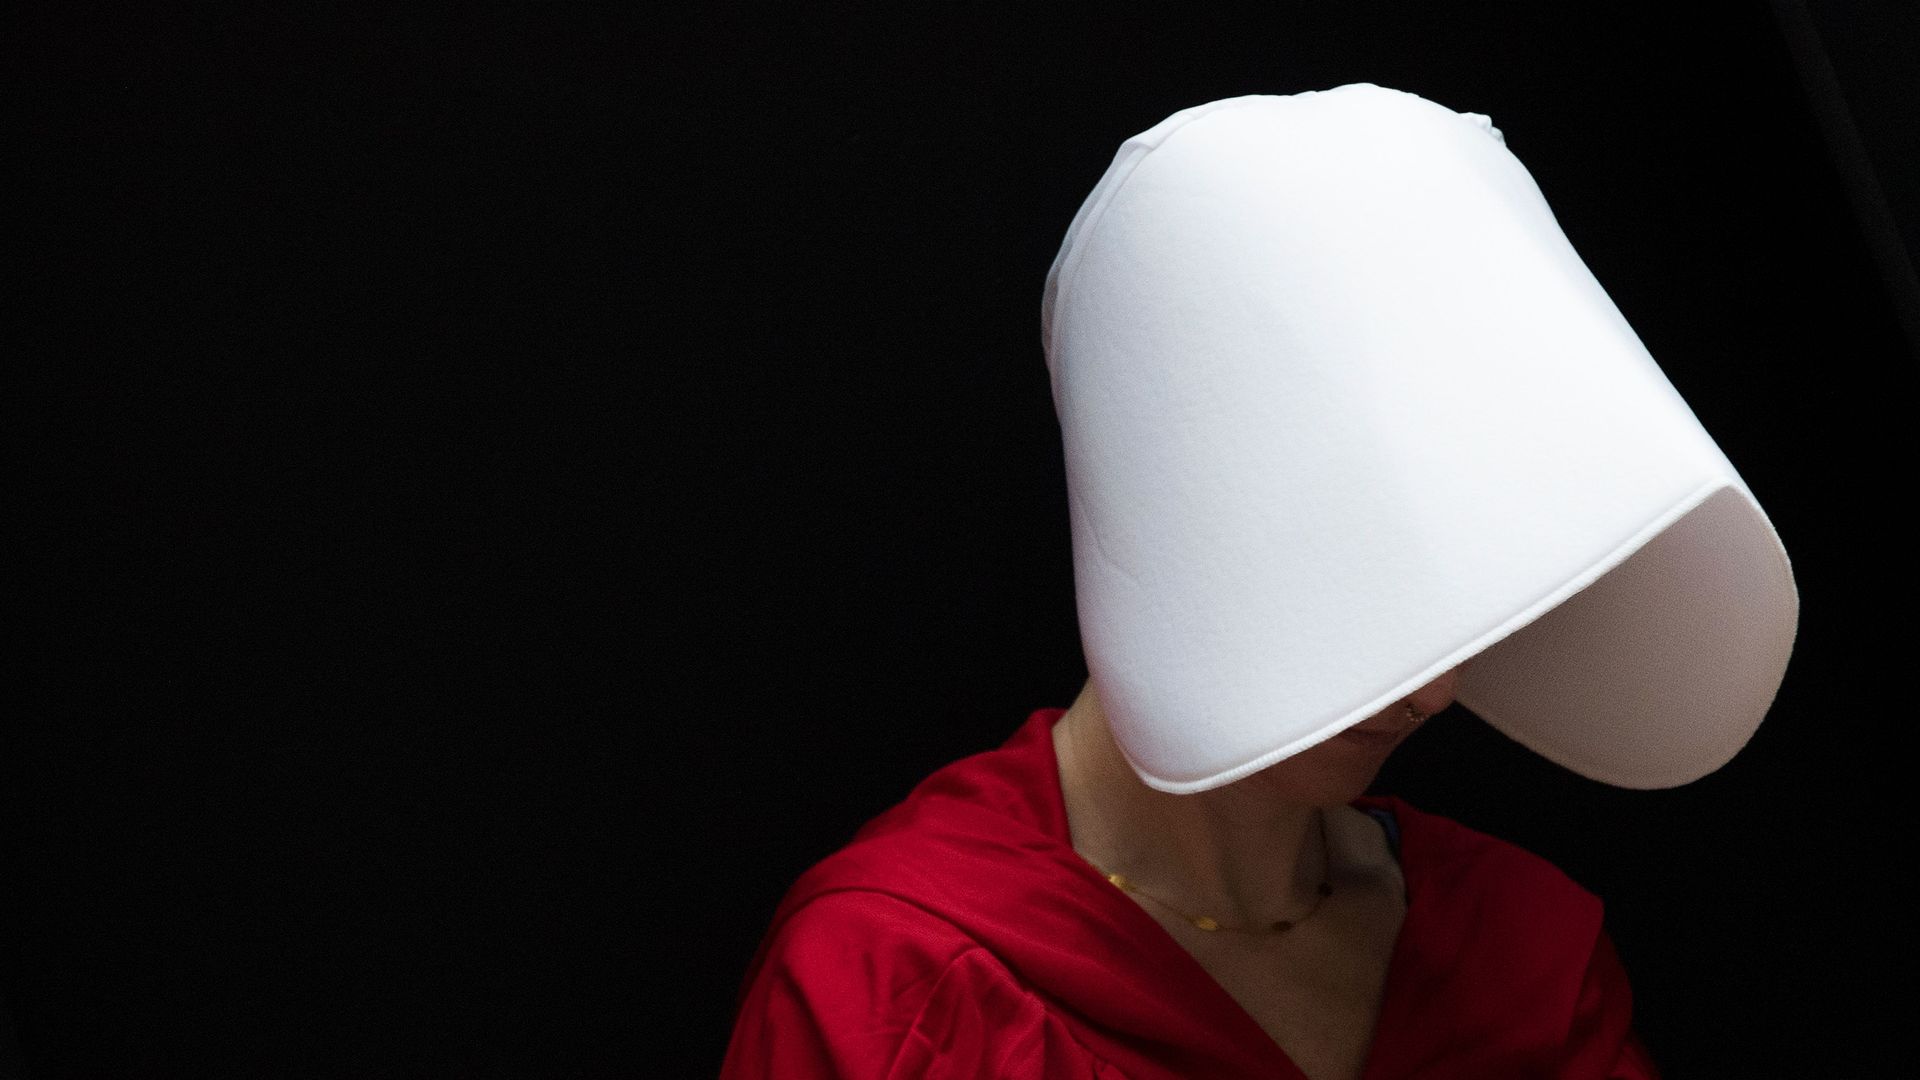 A woman dressed as a character from the Handmaid's Tale.